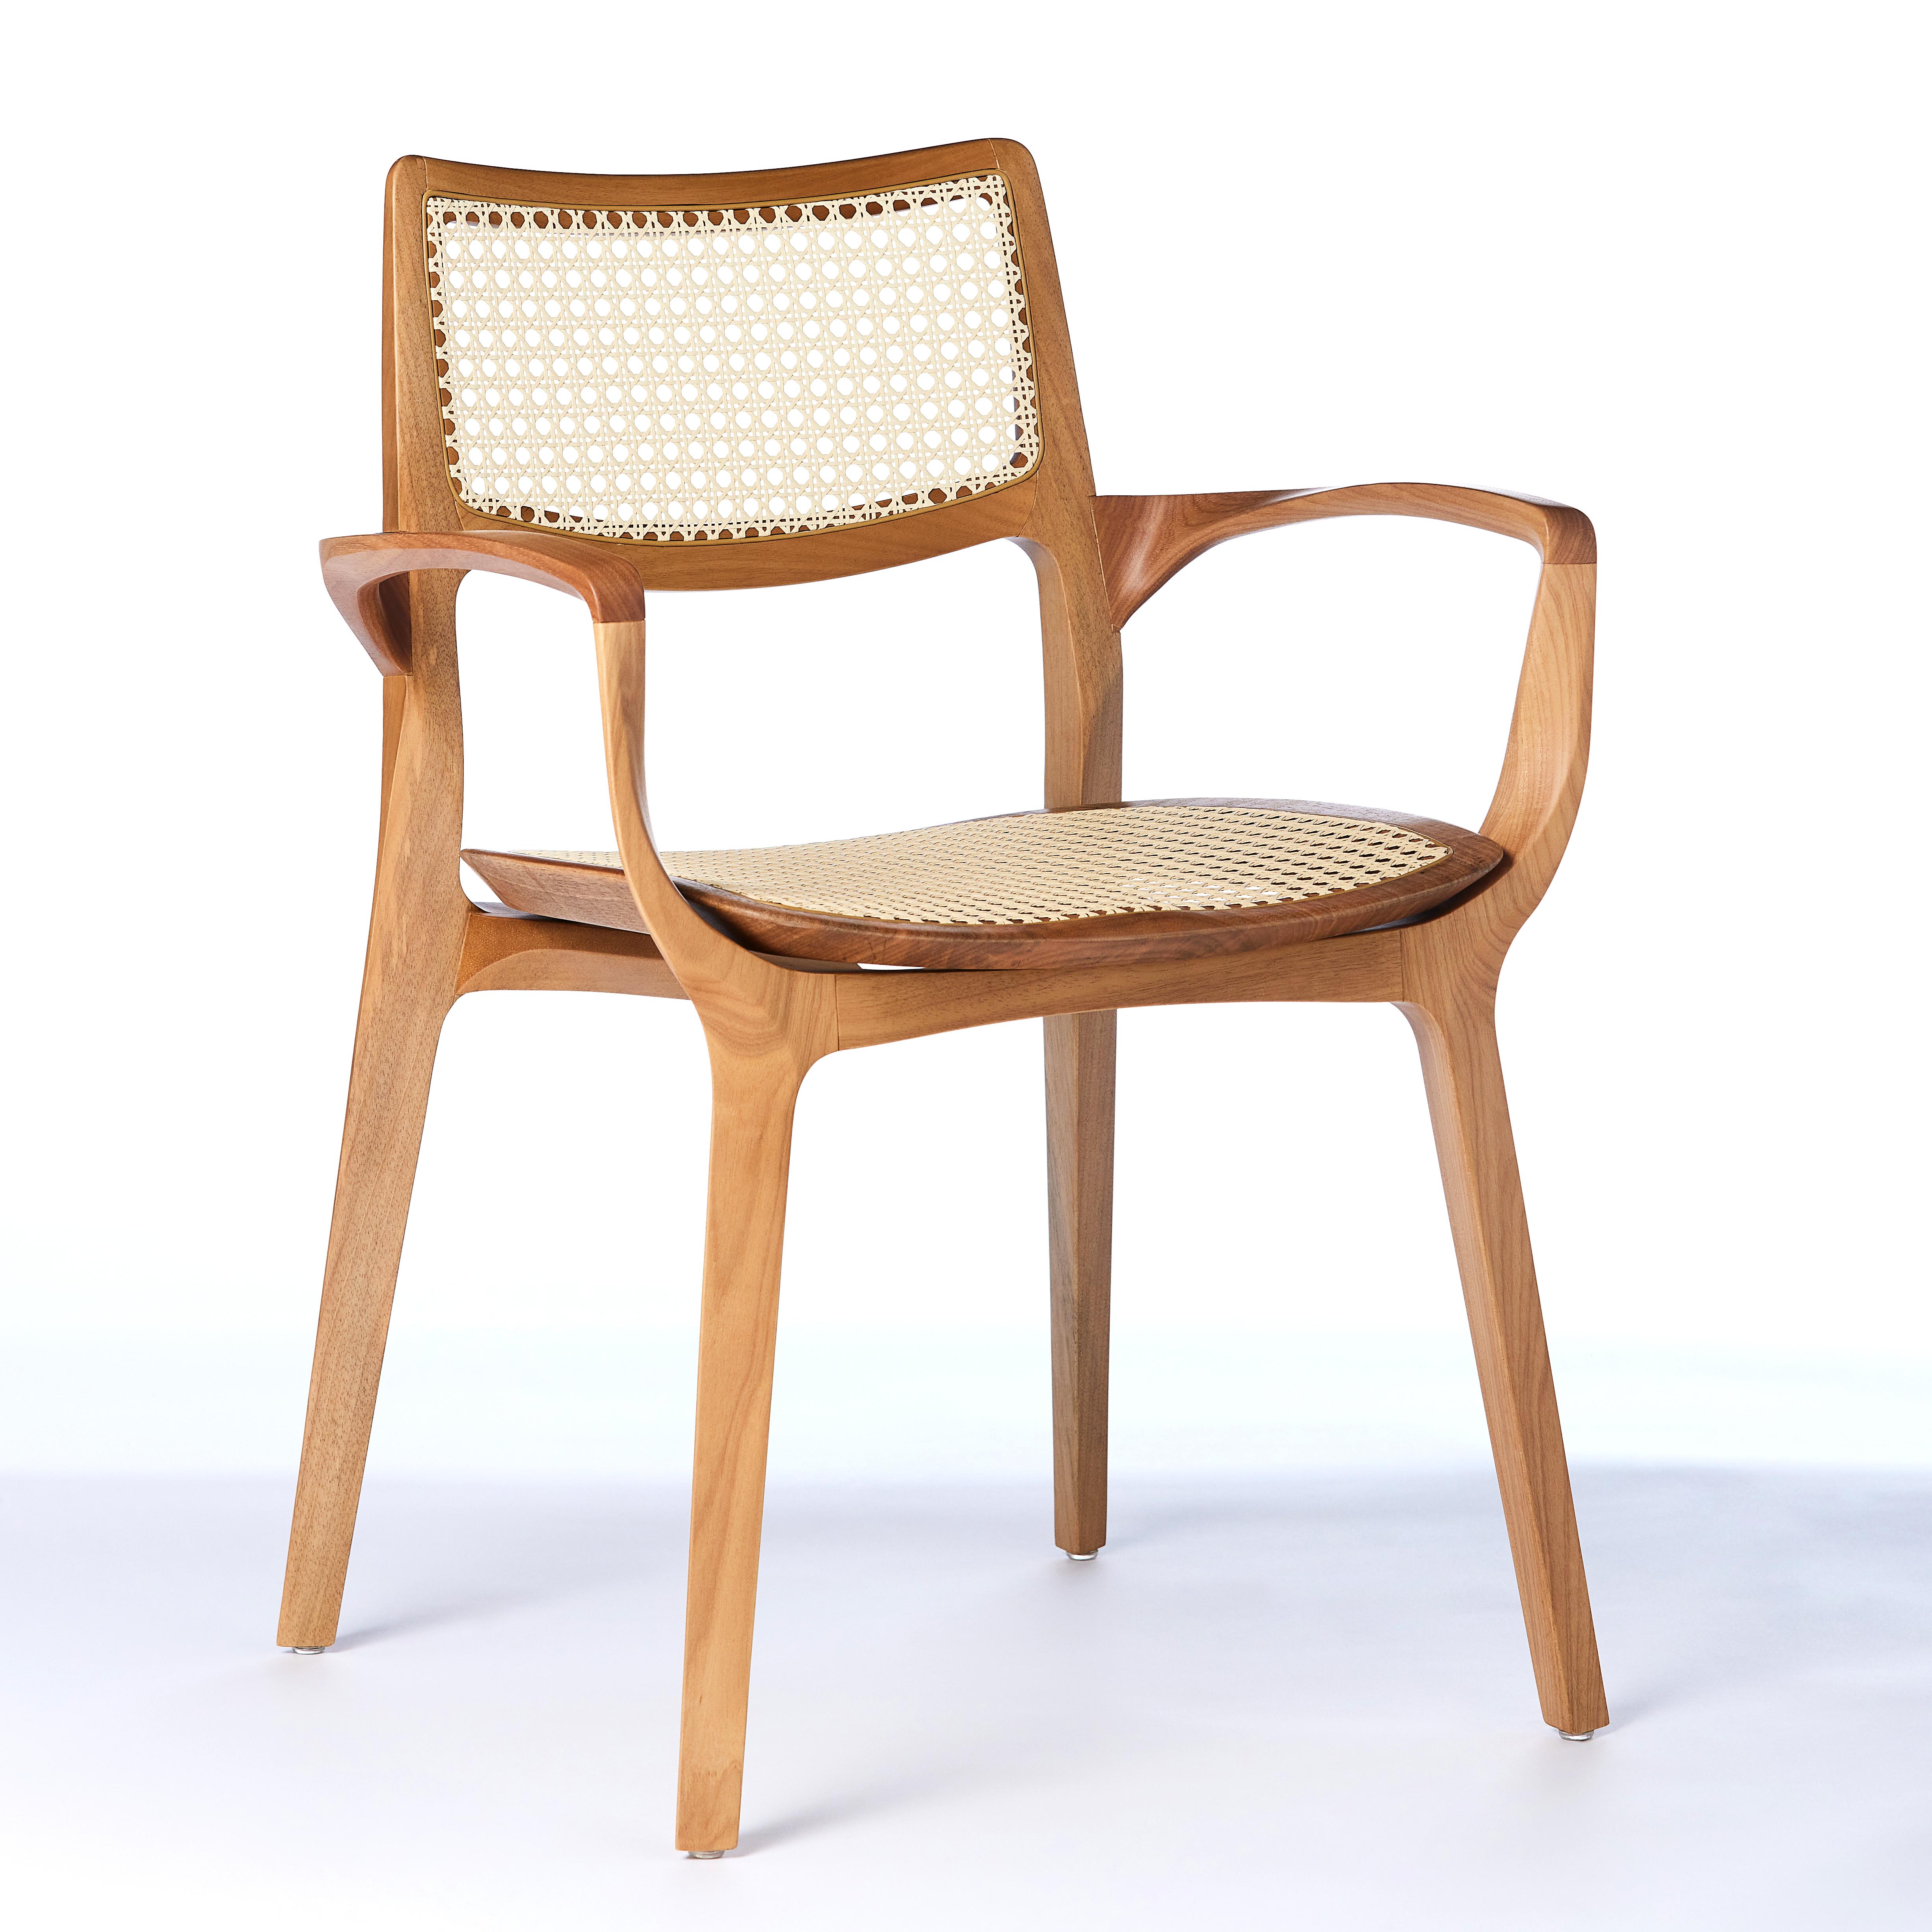 The Moderns Aurora Chair Sculptured in Walnut Finish Arms, leather seating, cane en vente 4